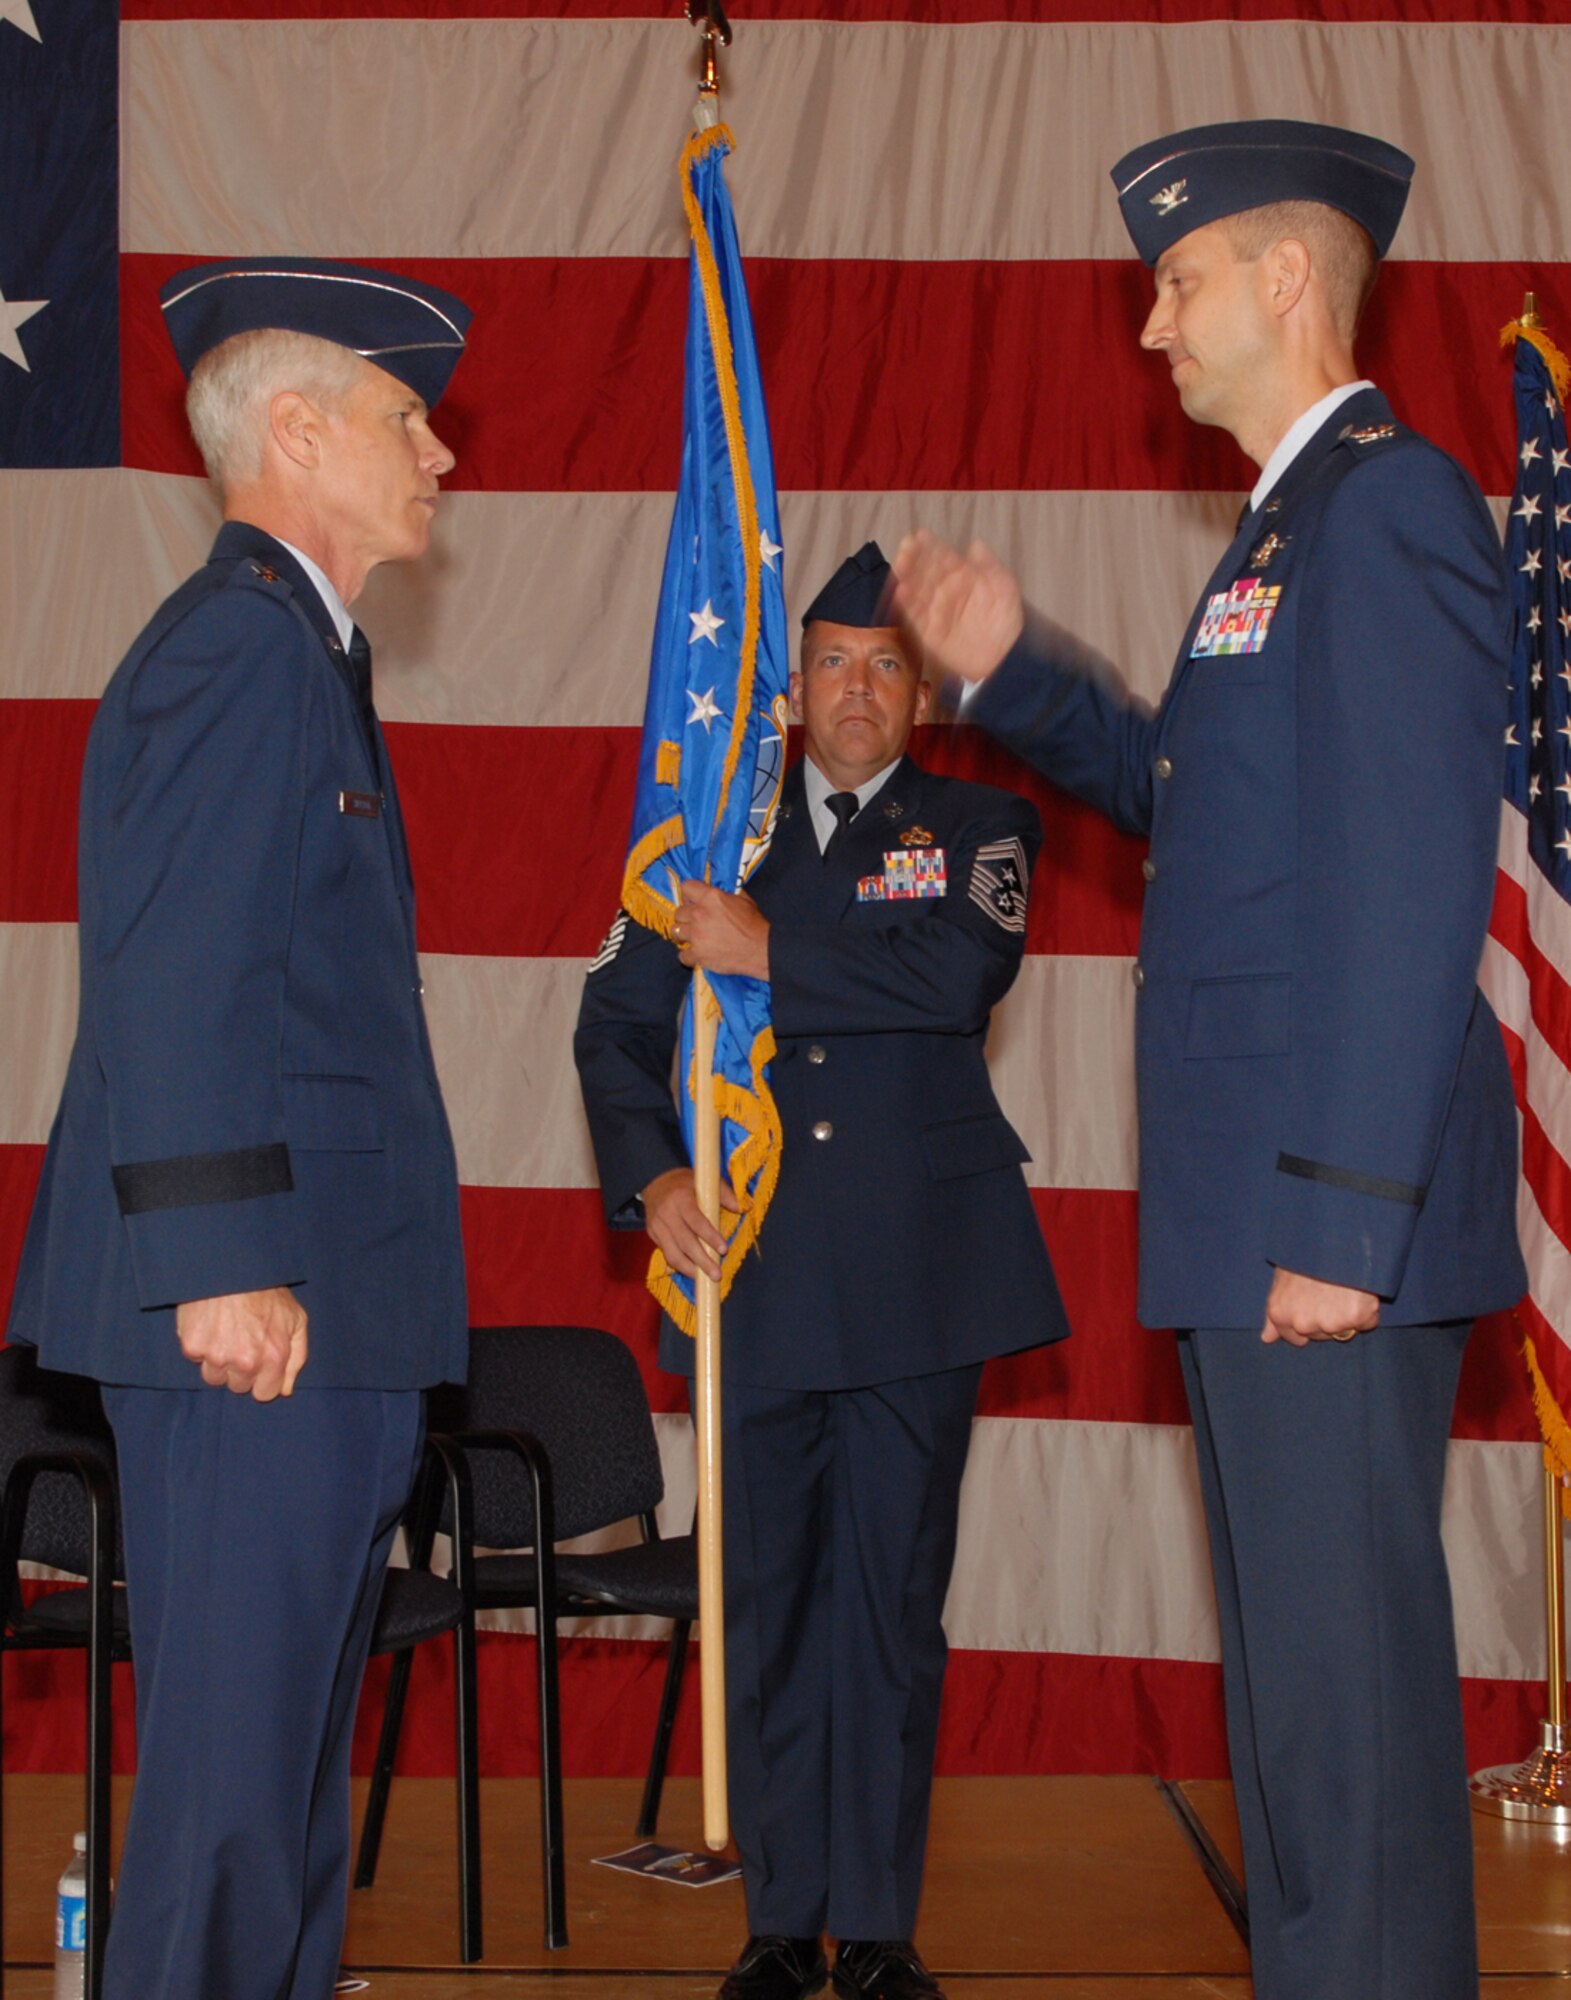 BUCKLEY AIR FORCE BASE, Colo. -- Col. Donald "Wayne" McGee Jr. (right) salutes Maj. Gen. William Shelton (left), 14th Air Force commander, after assuming command of the 460th Space Wing during a change of command ceremony June 12 at Hangar 909 here. Colonel McGee replaced Col. David W. Ziegler who is retiring after 25 years of service. (U.S. Air Force photo by Senior Airman LaDonnis Crump)